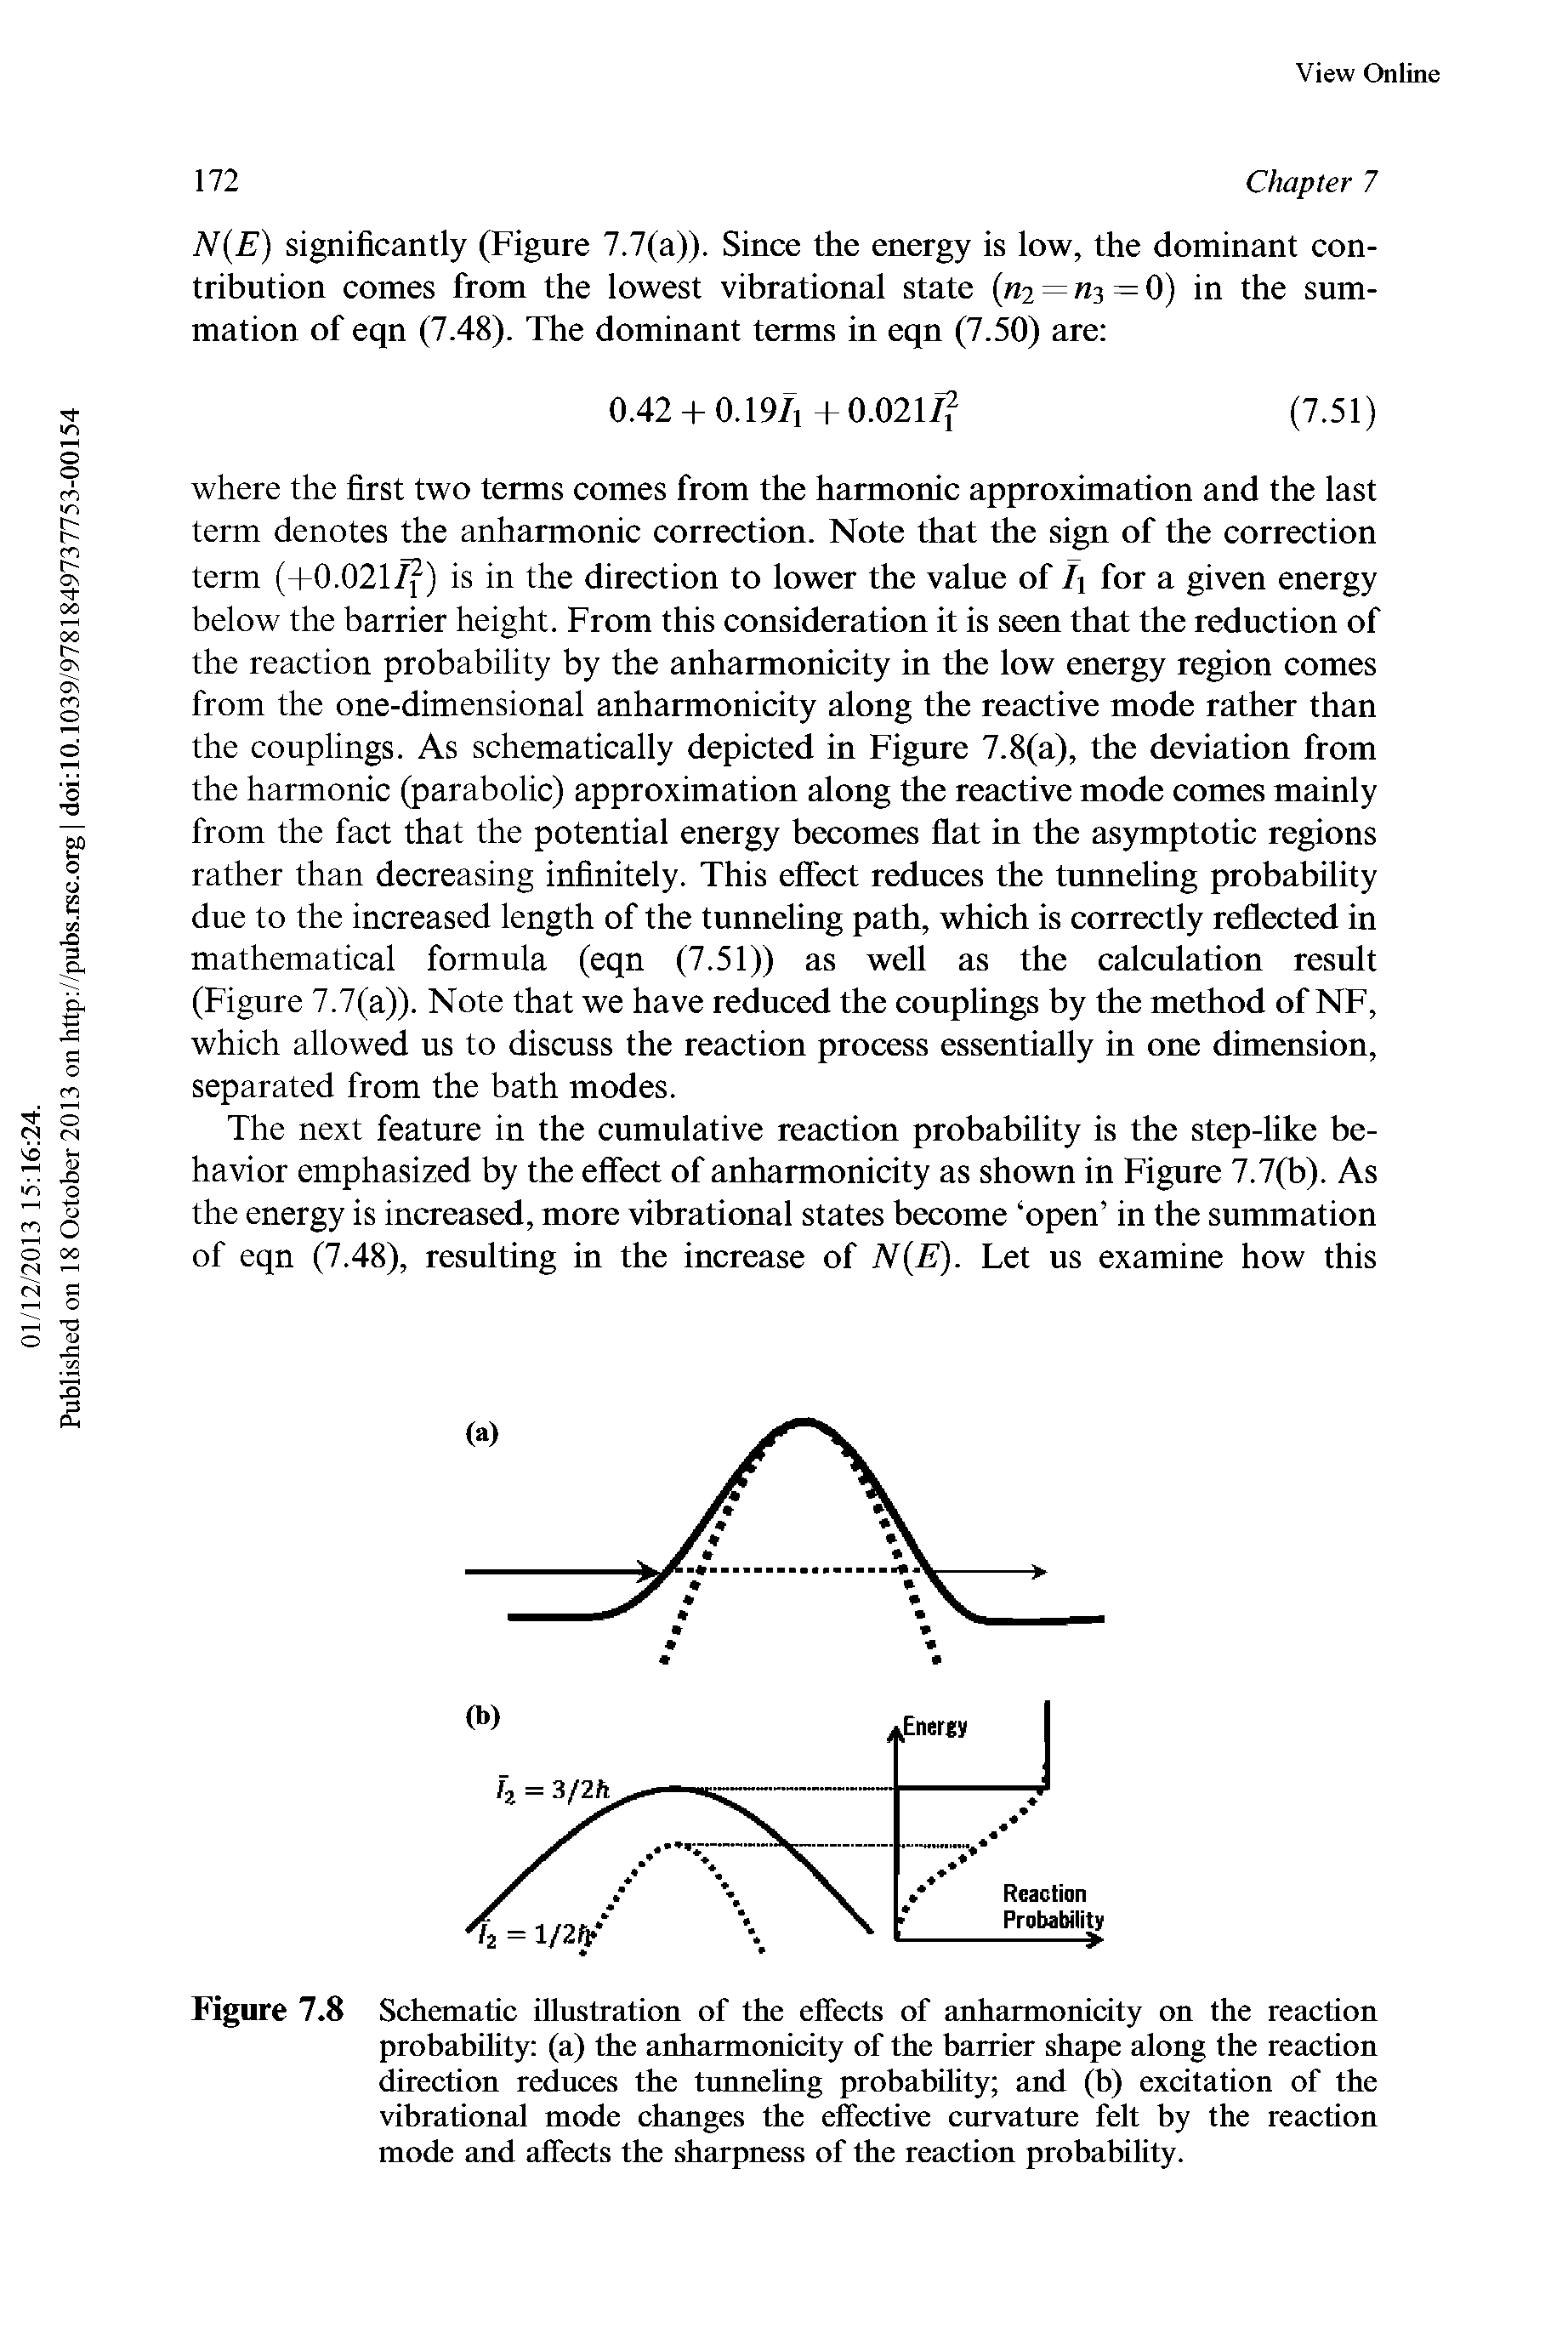 Figure 7.8 Schematic illustration of the effects of anharmonicity on the reaction probability (a) the anharmonicity of the barrier shape along the reaction direction reduces the tunneling probability and (b) excitation of the vibrational mode changes the effective curvature felt by the reaction mode and affects the sharpness of the reaction probability.